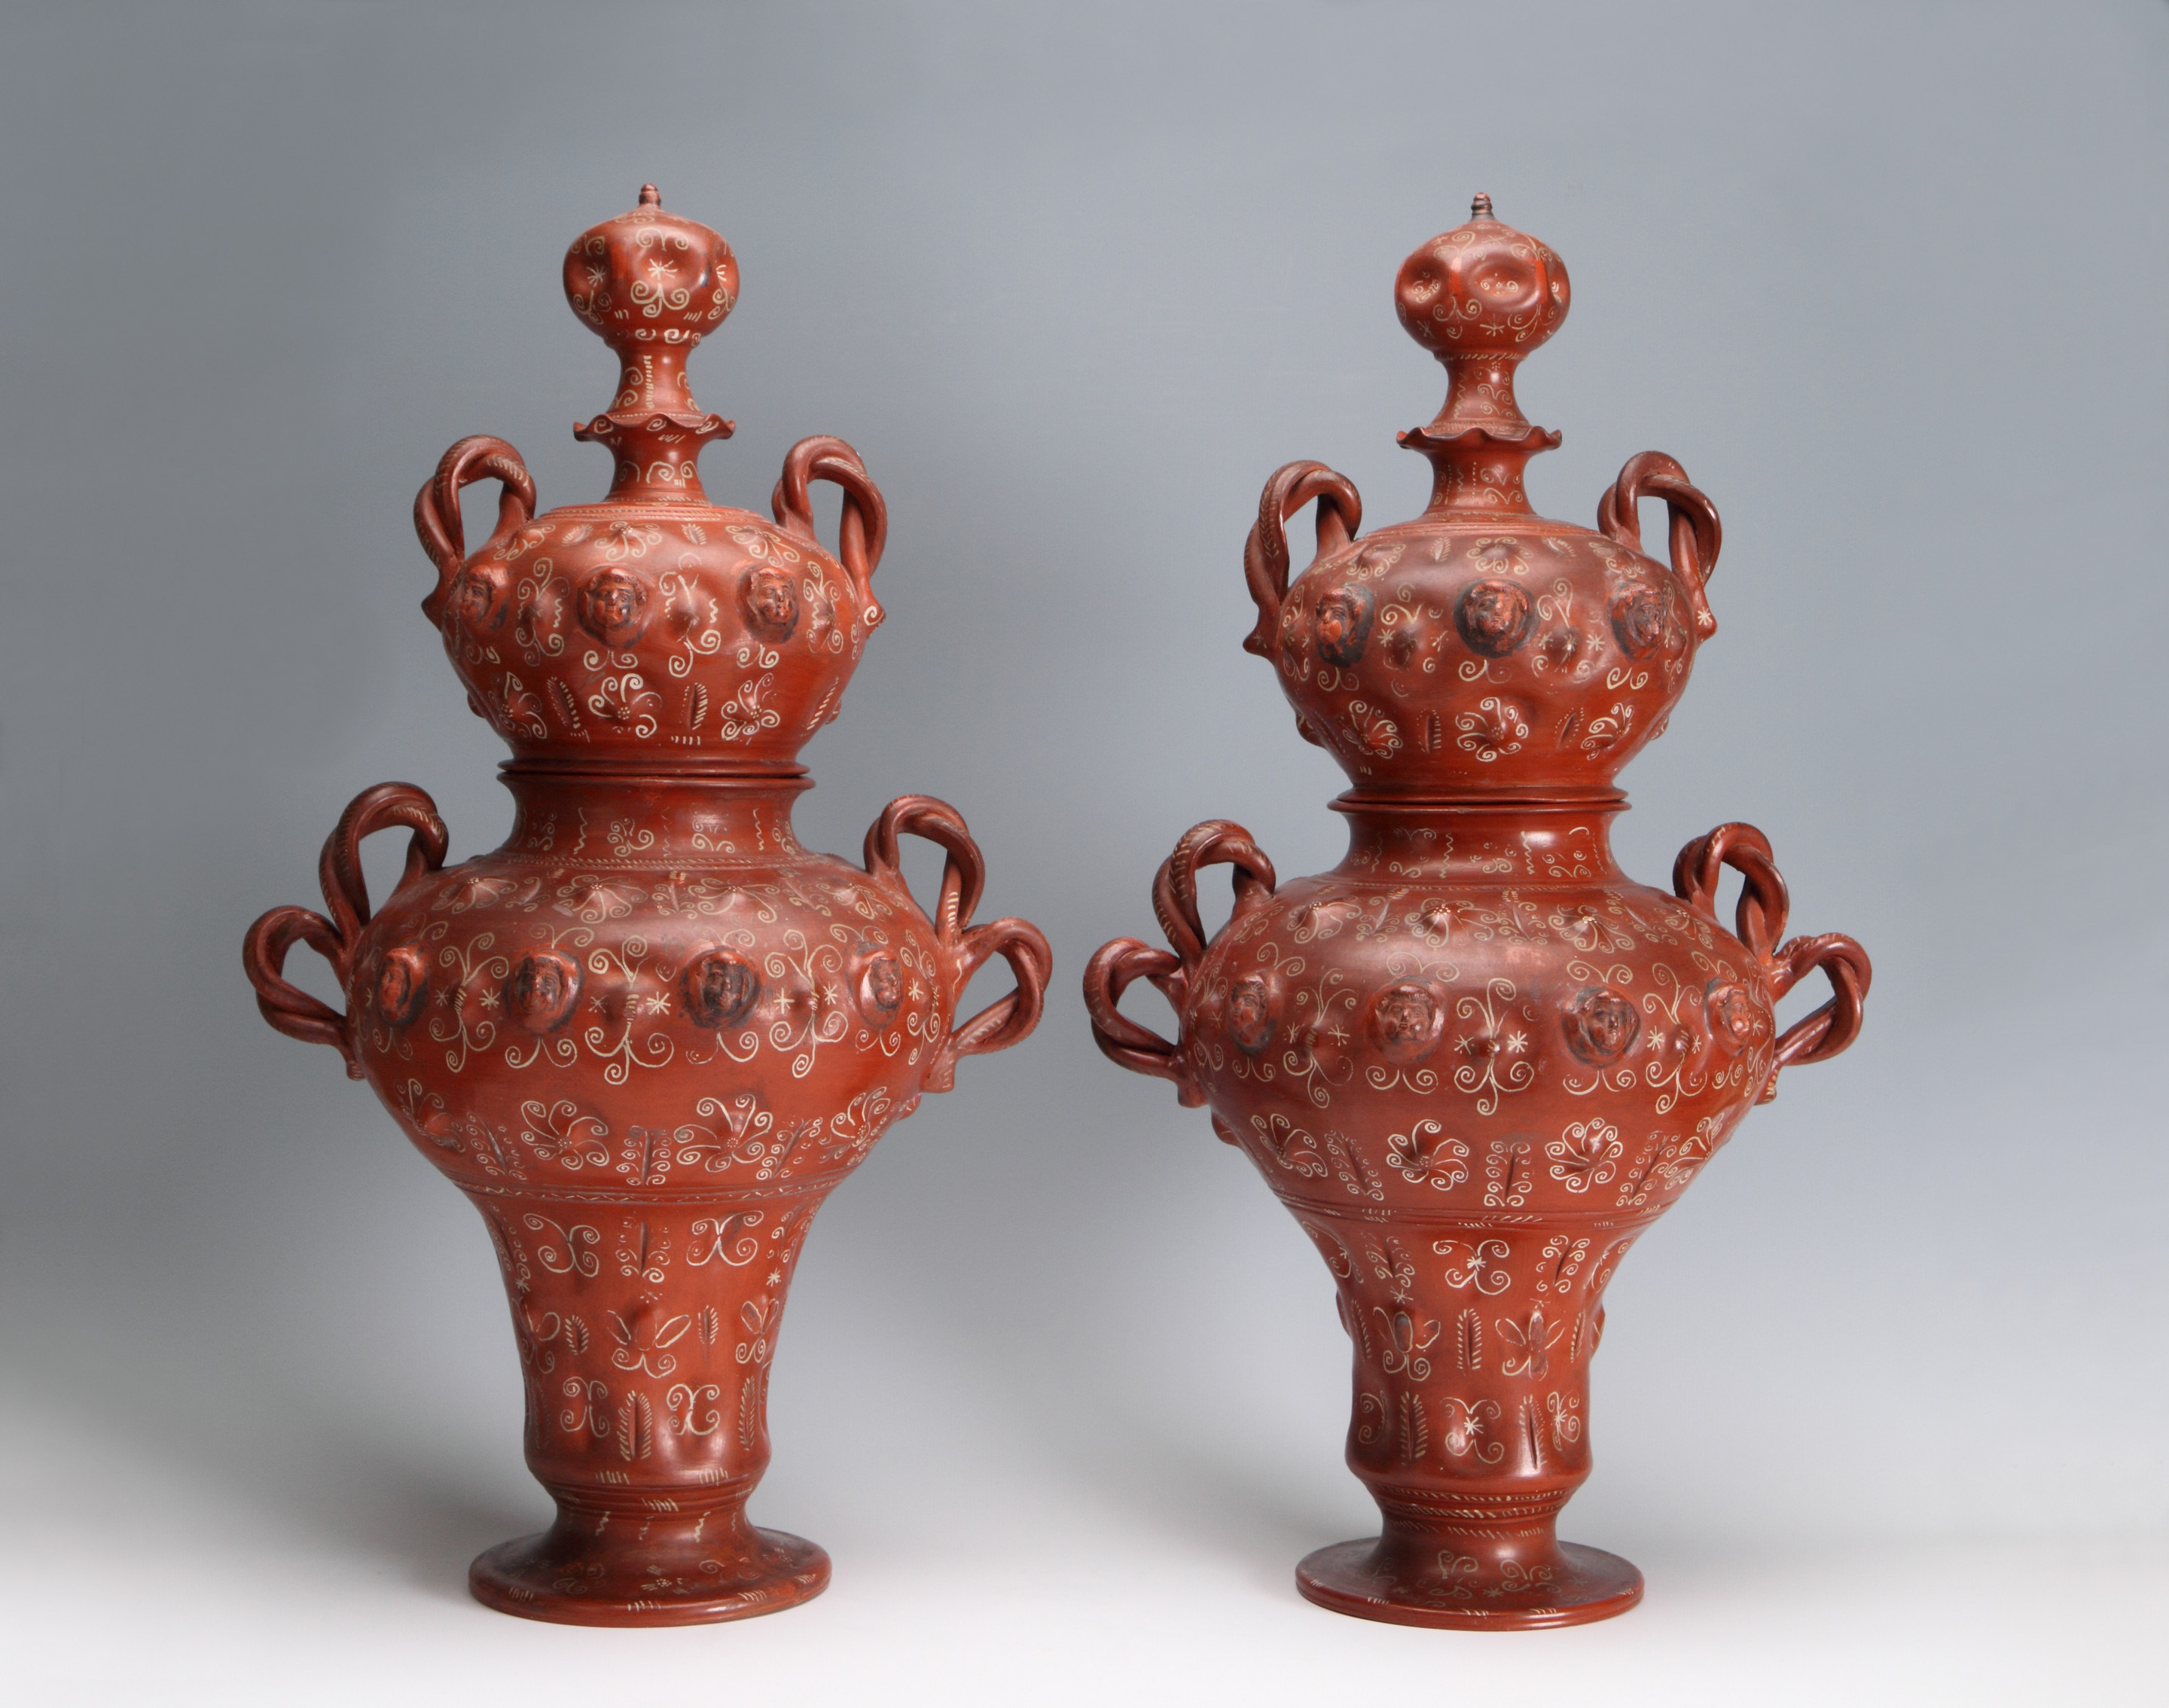 A Pair of Mexican Burnished and Slip-Decorated Vases and Covers, Tonalá, Mexico